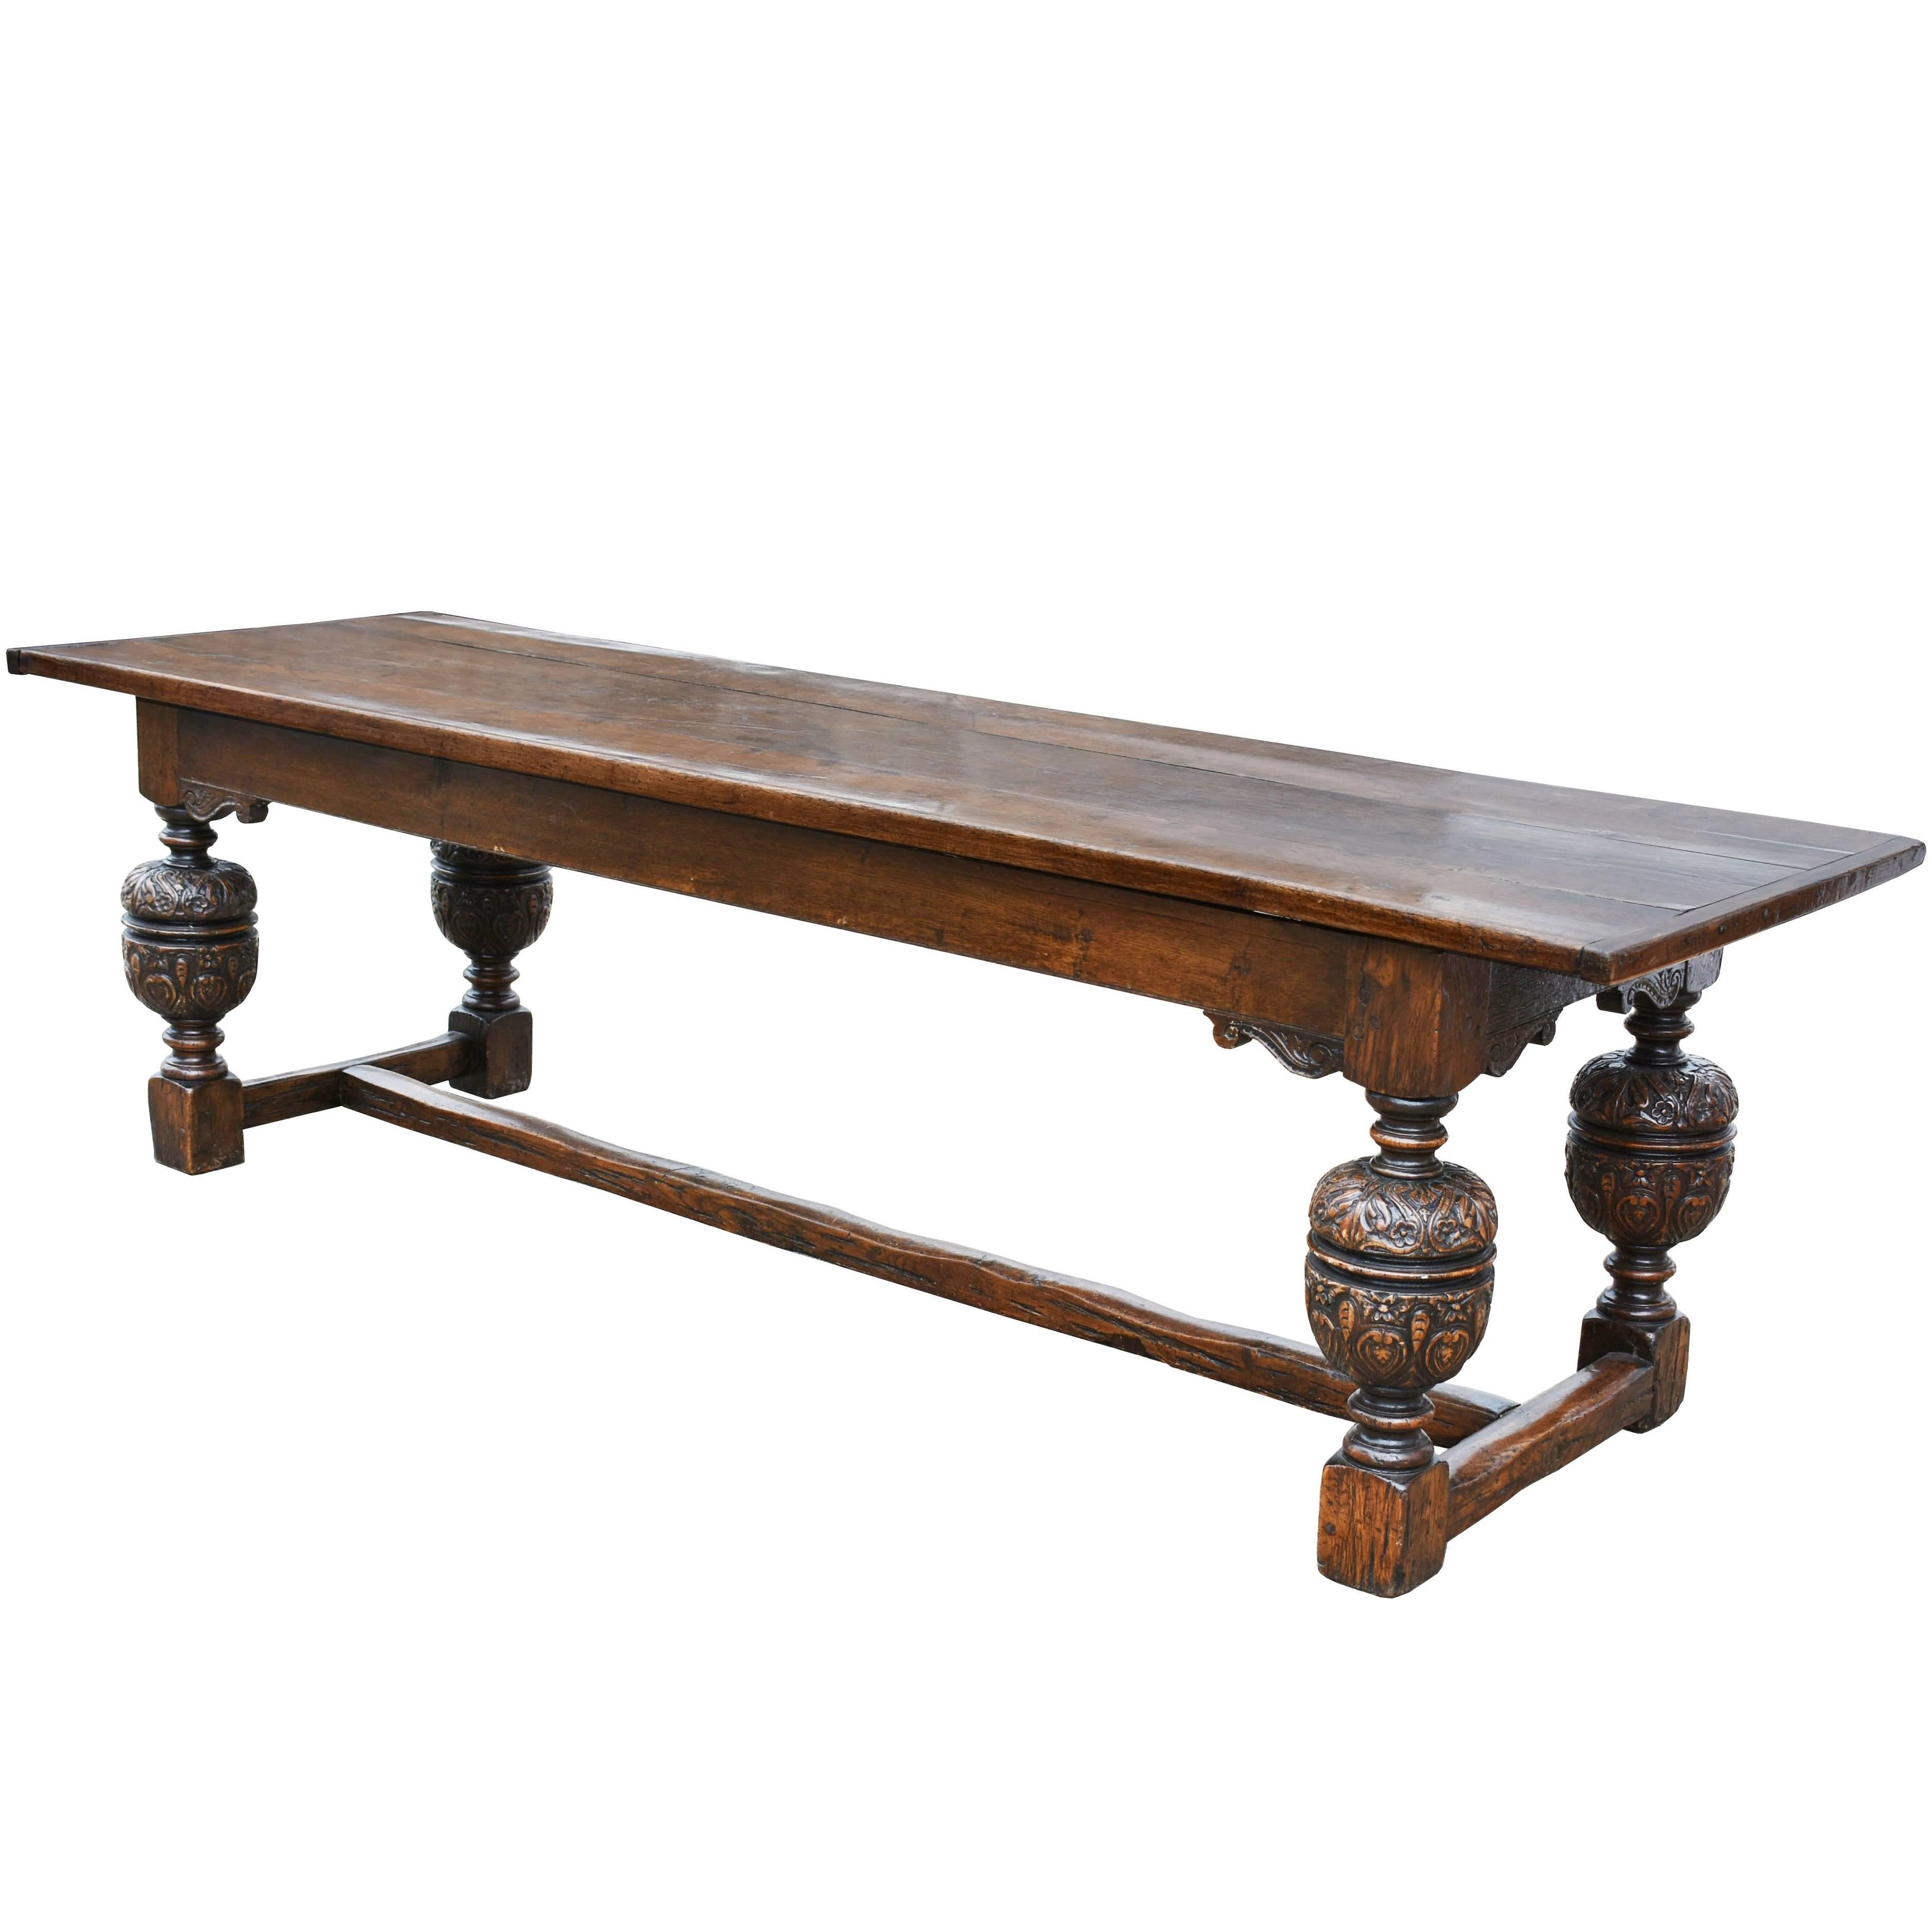 17th Century Large Solid Oak Refectory Table